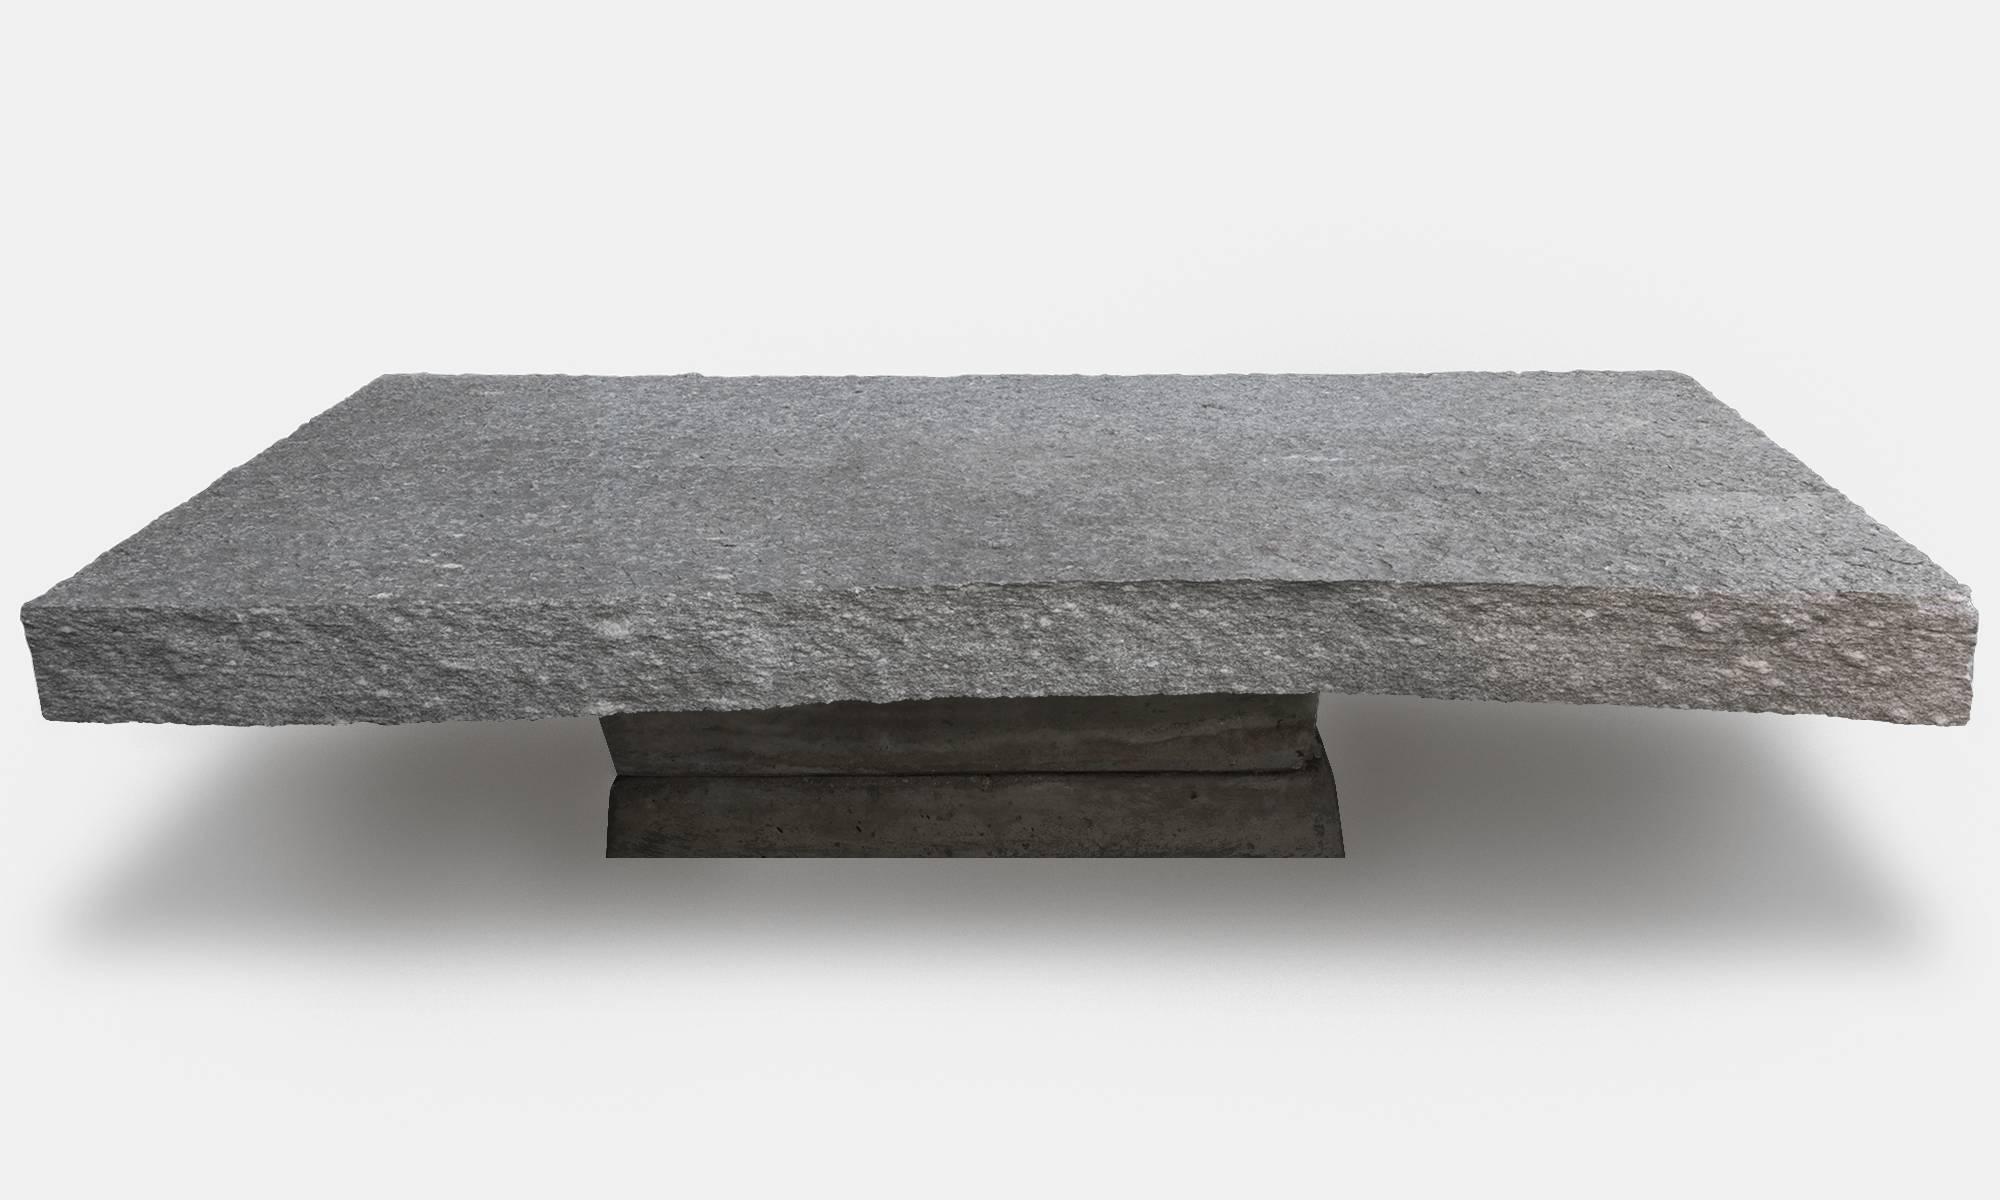 Primitive stone coffee table, Italy circa 1910

Thick stone slab on cast cement base.

Measures: 55